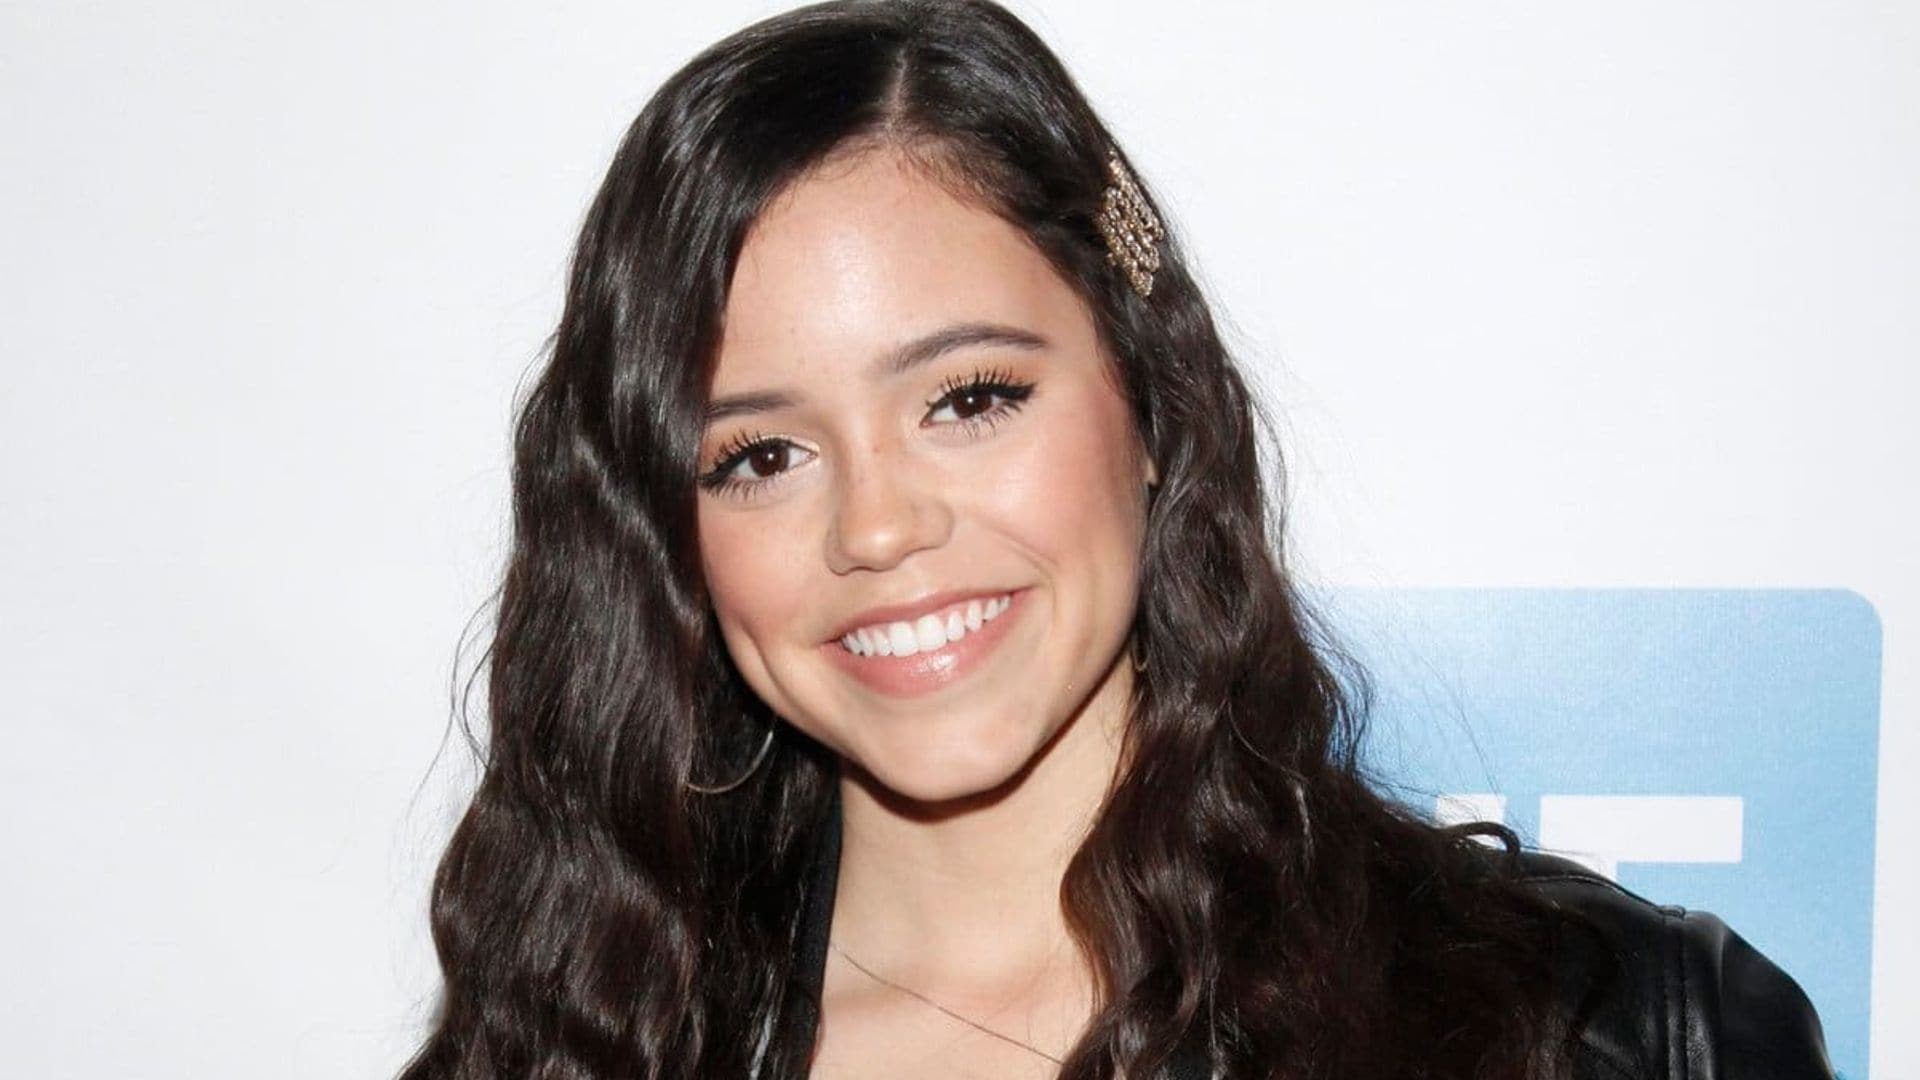 Jenna Ortega becomes Wednesday Addams in the upcoming Tim Burton’s live-action series for Netflix